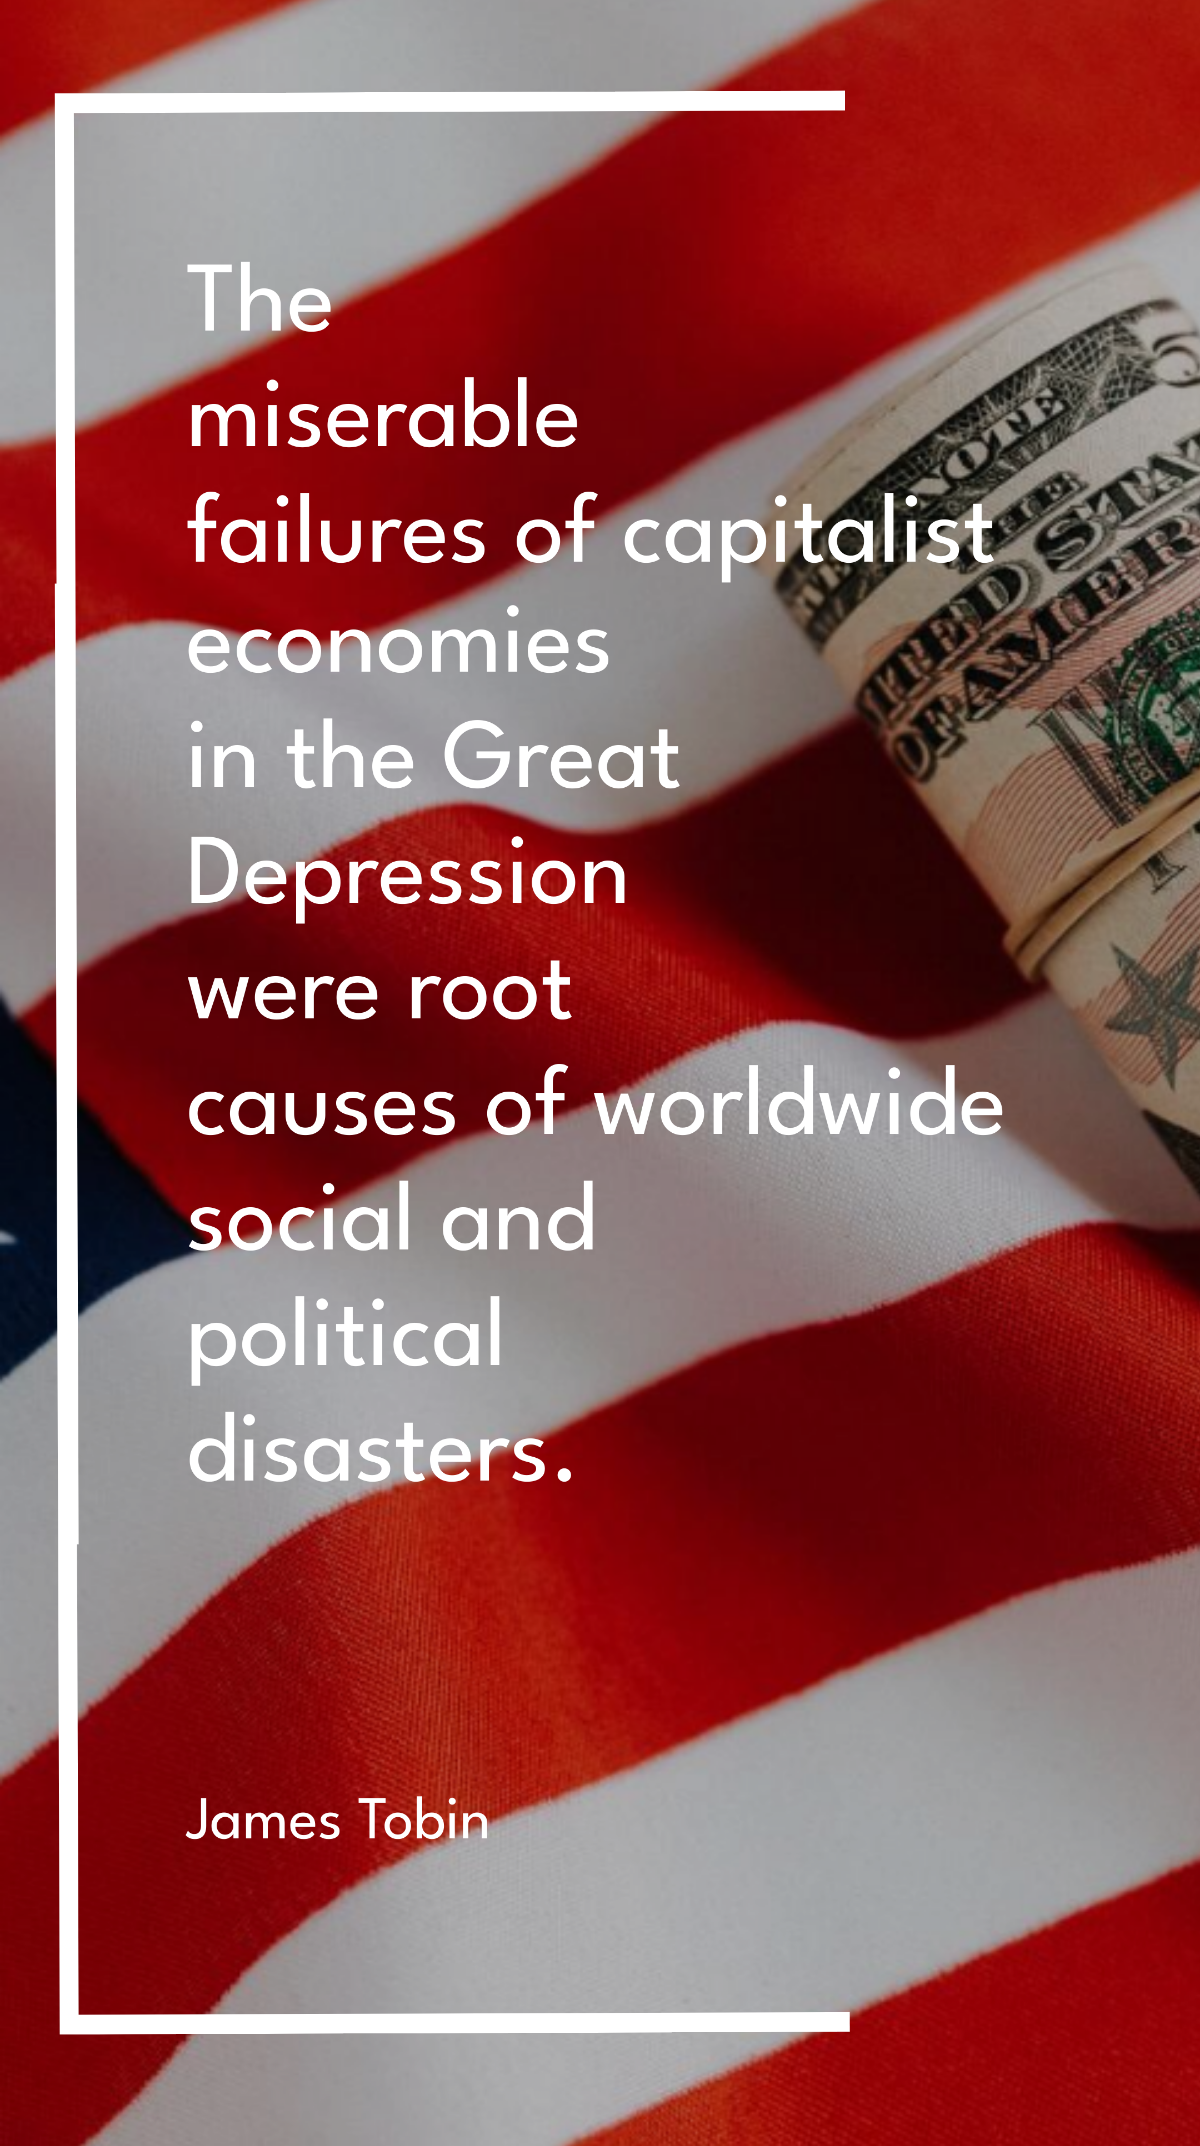 James Tobin - The miserable failures of capitalist economies in the Great Depression were root causes of worldwide social and political disasters. Template